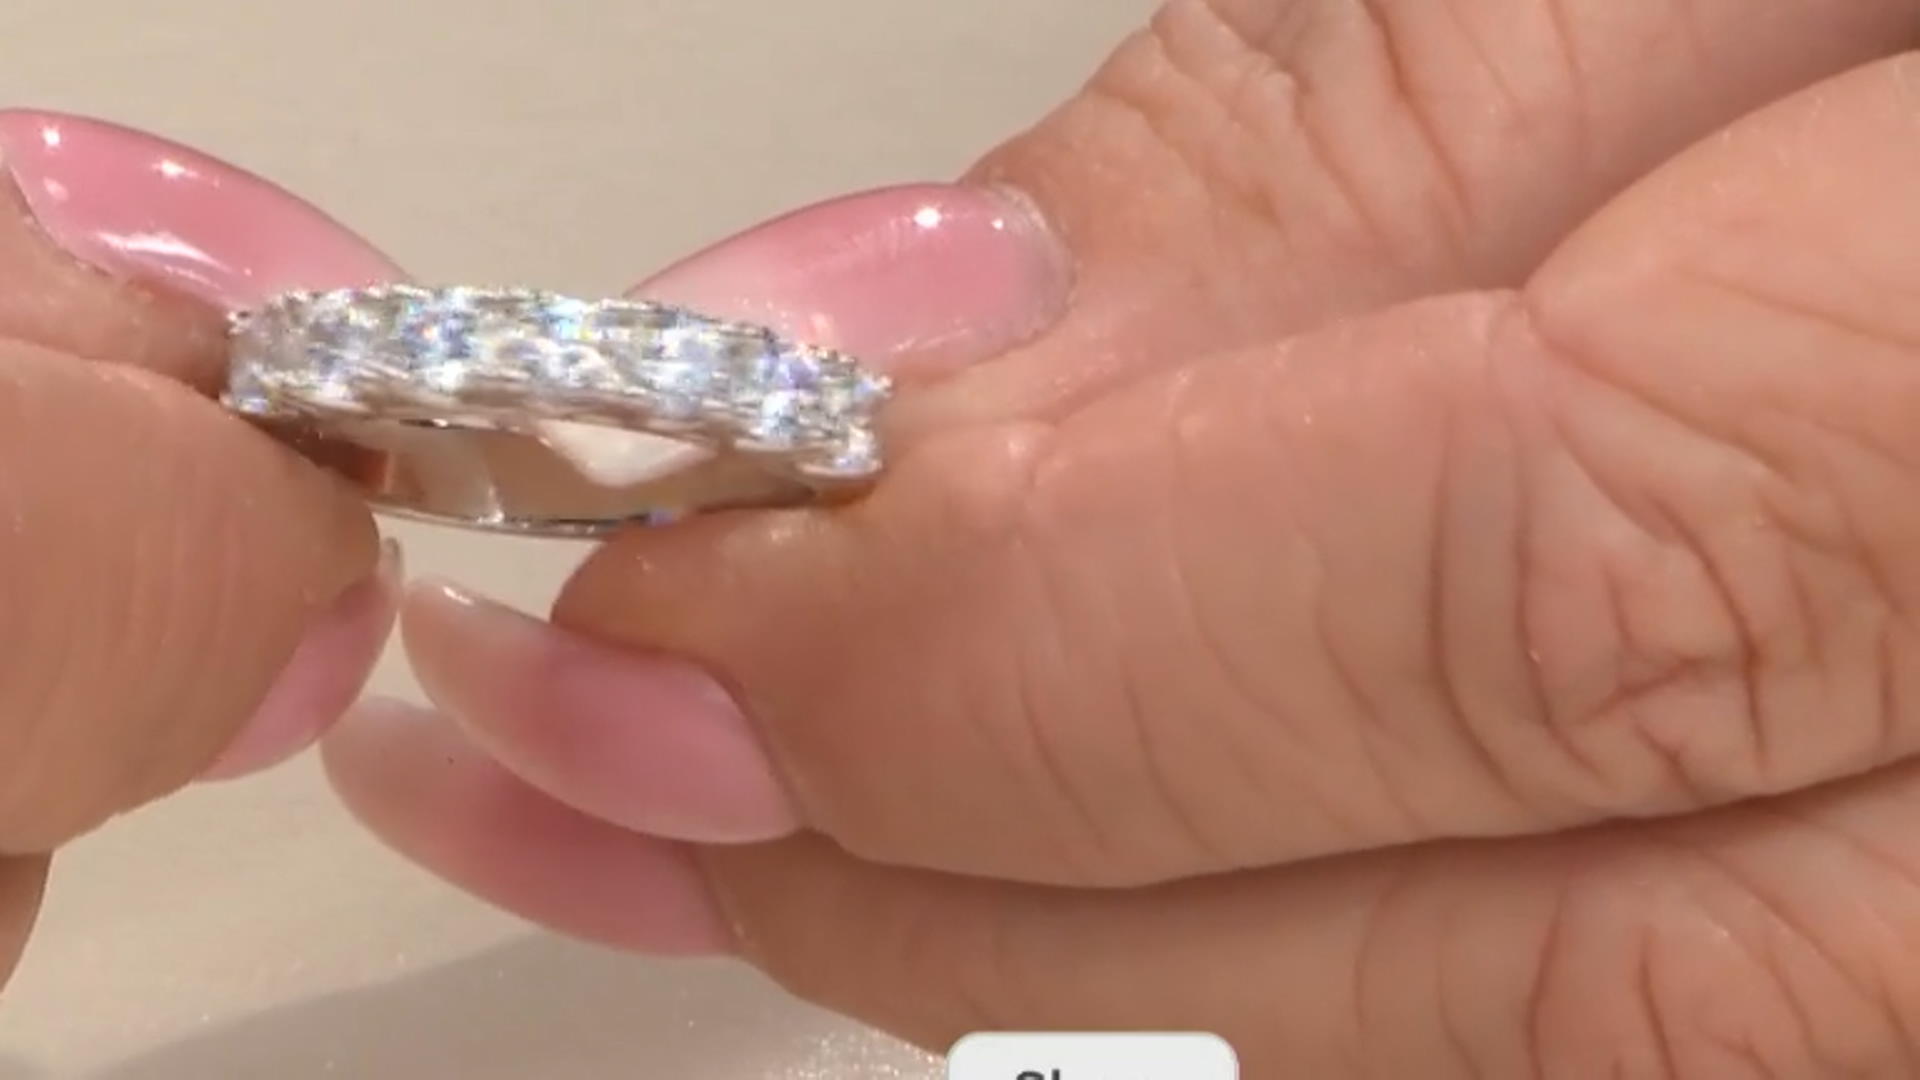 White Cubic Zirconia Platinum Over Sterling Silver Ring Set. (2.38ctw DEW) Video Thumbnail